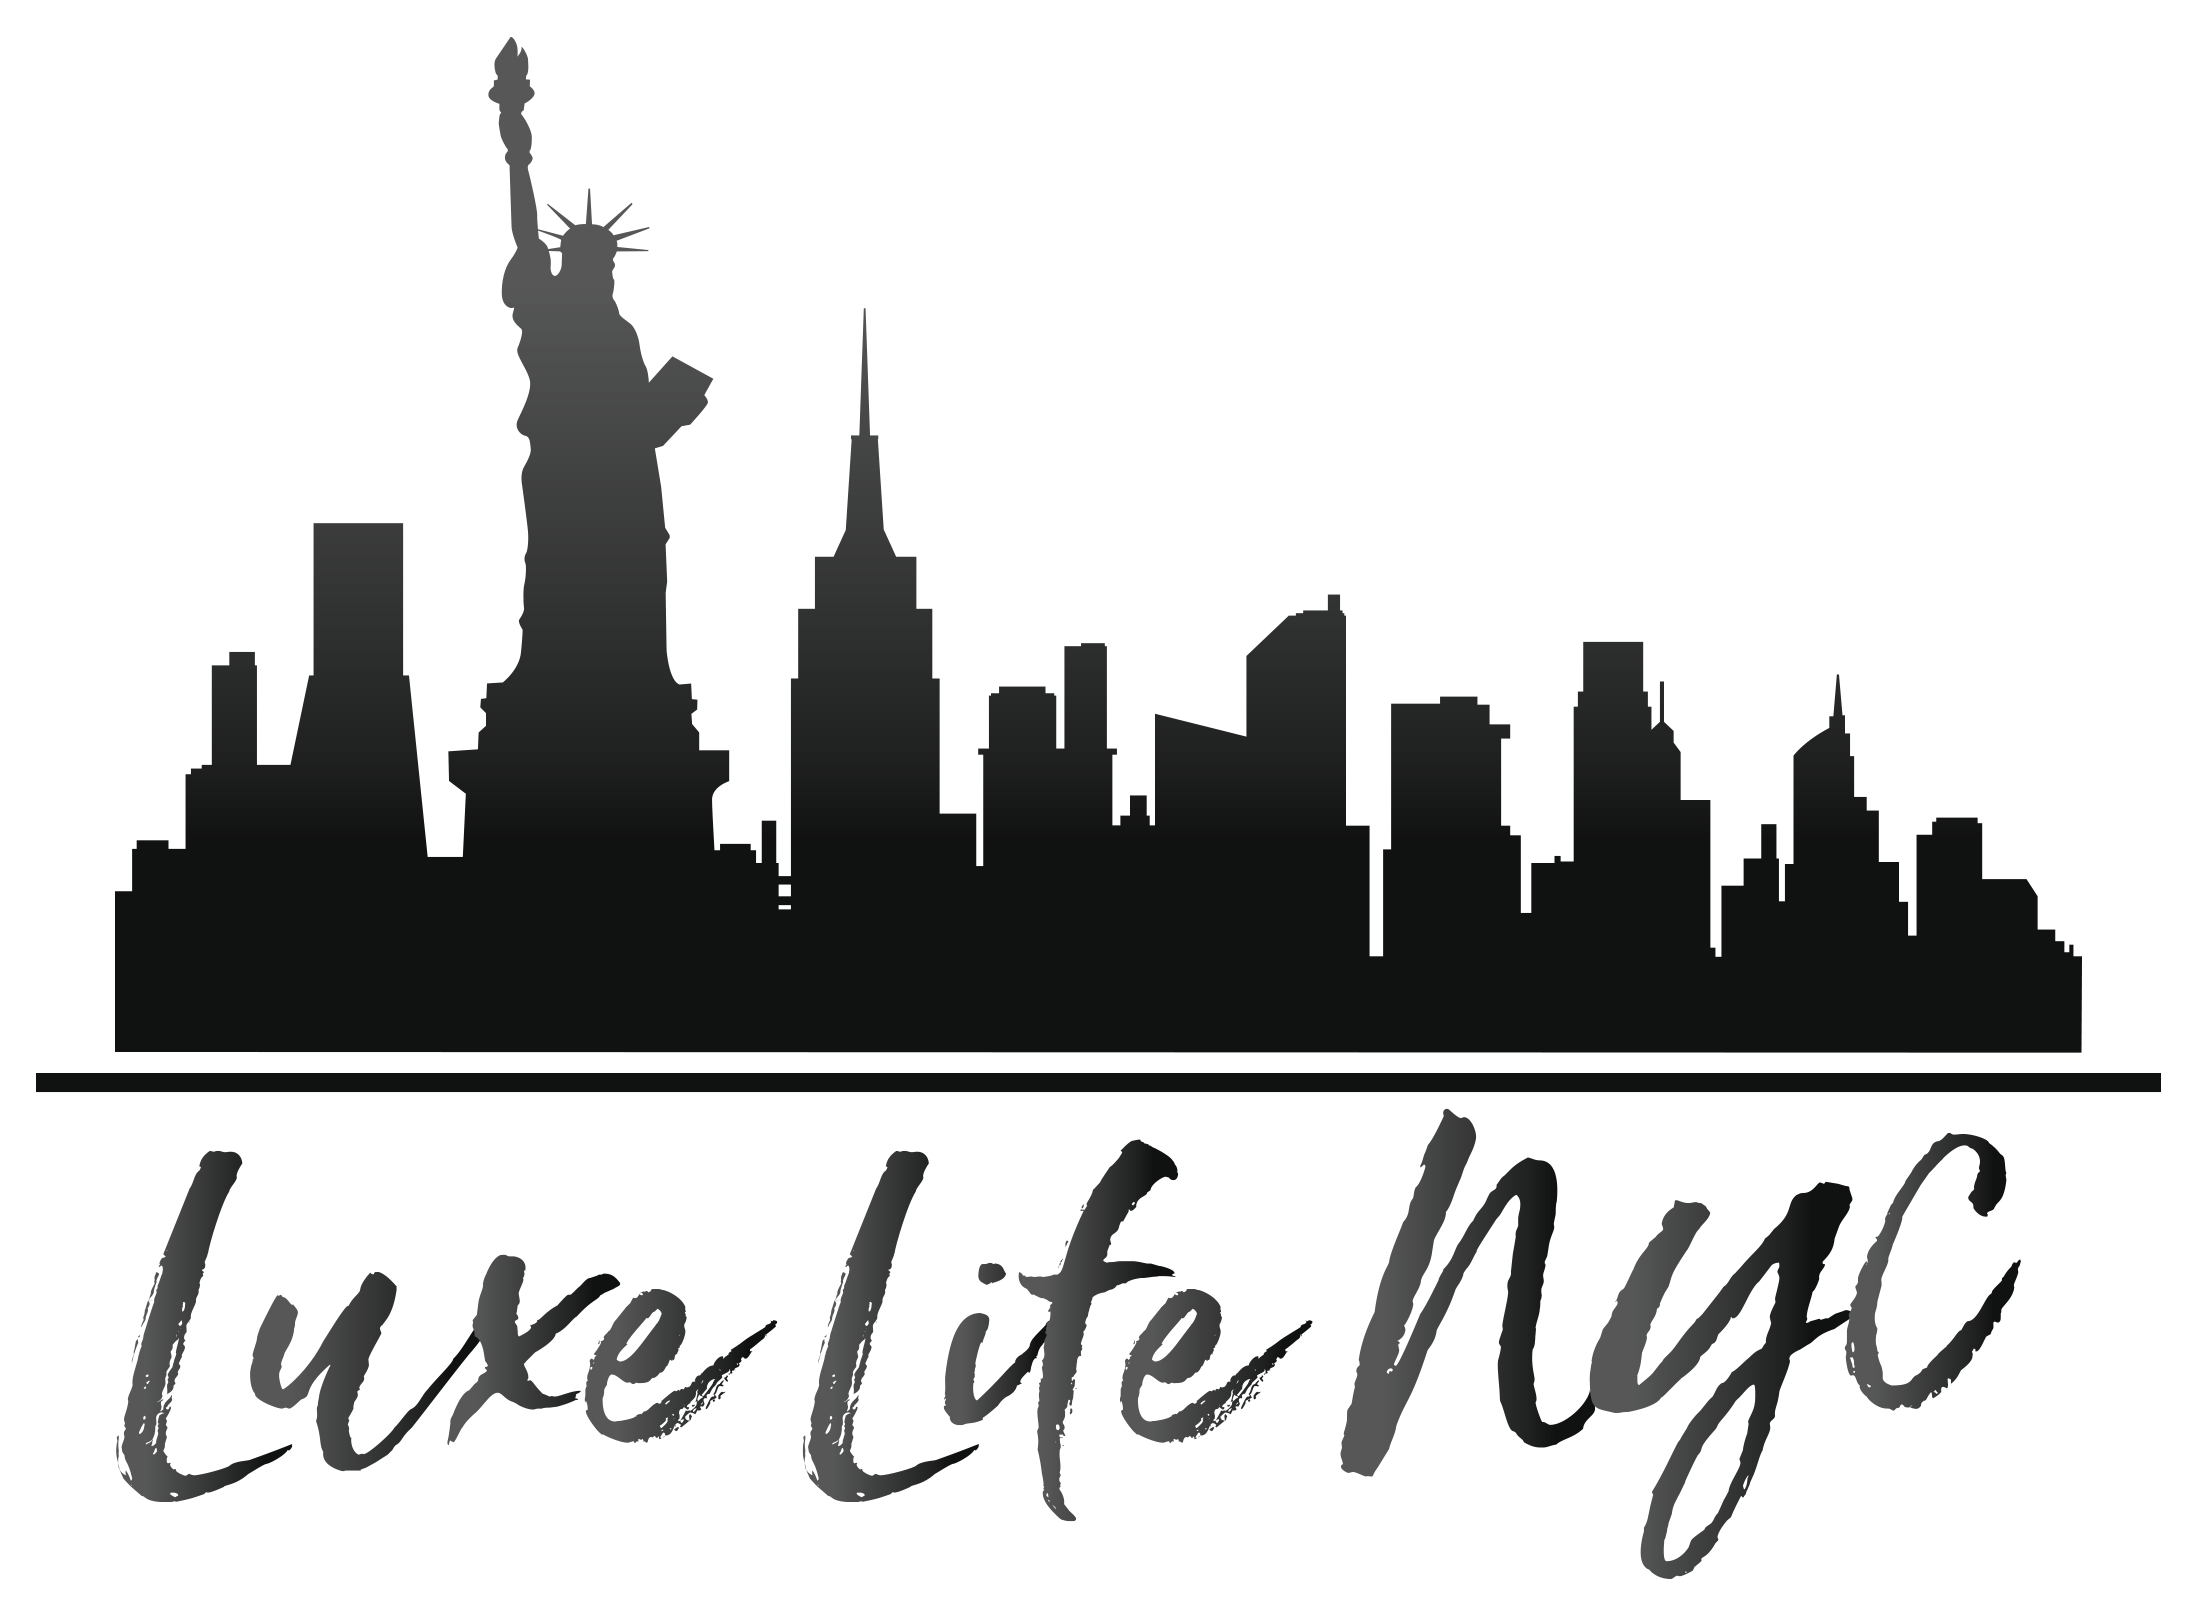 New York City Skyline Watercolor Painting Silhouette New York City Png Download 2201 1612 Free Transparent New York City Png Download Clip Art Library